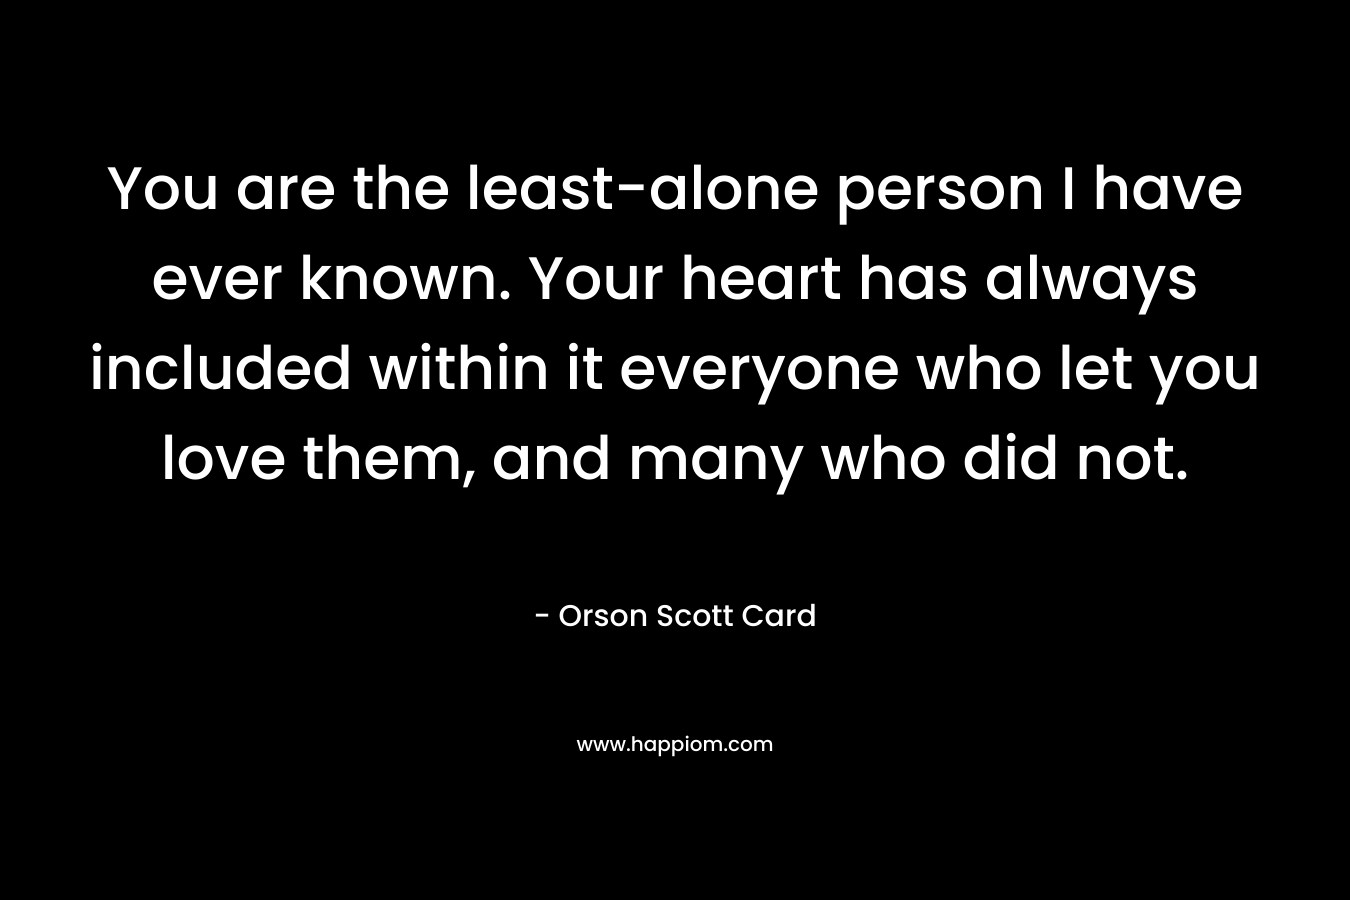 You are the least-alone person I have ever known. Your heart has always included within it everyone who let you love them, and many who did not. – Orson Scott Card